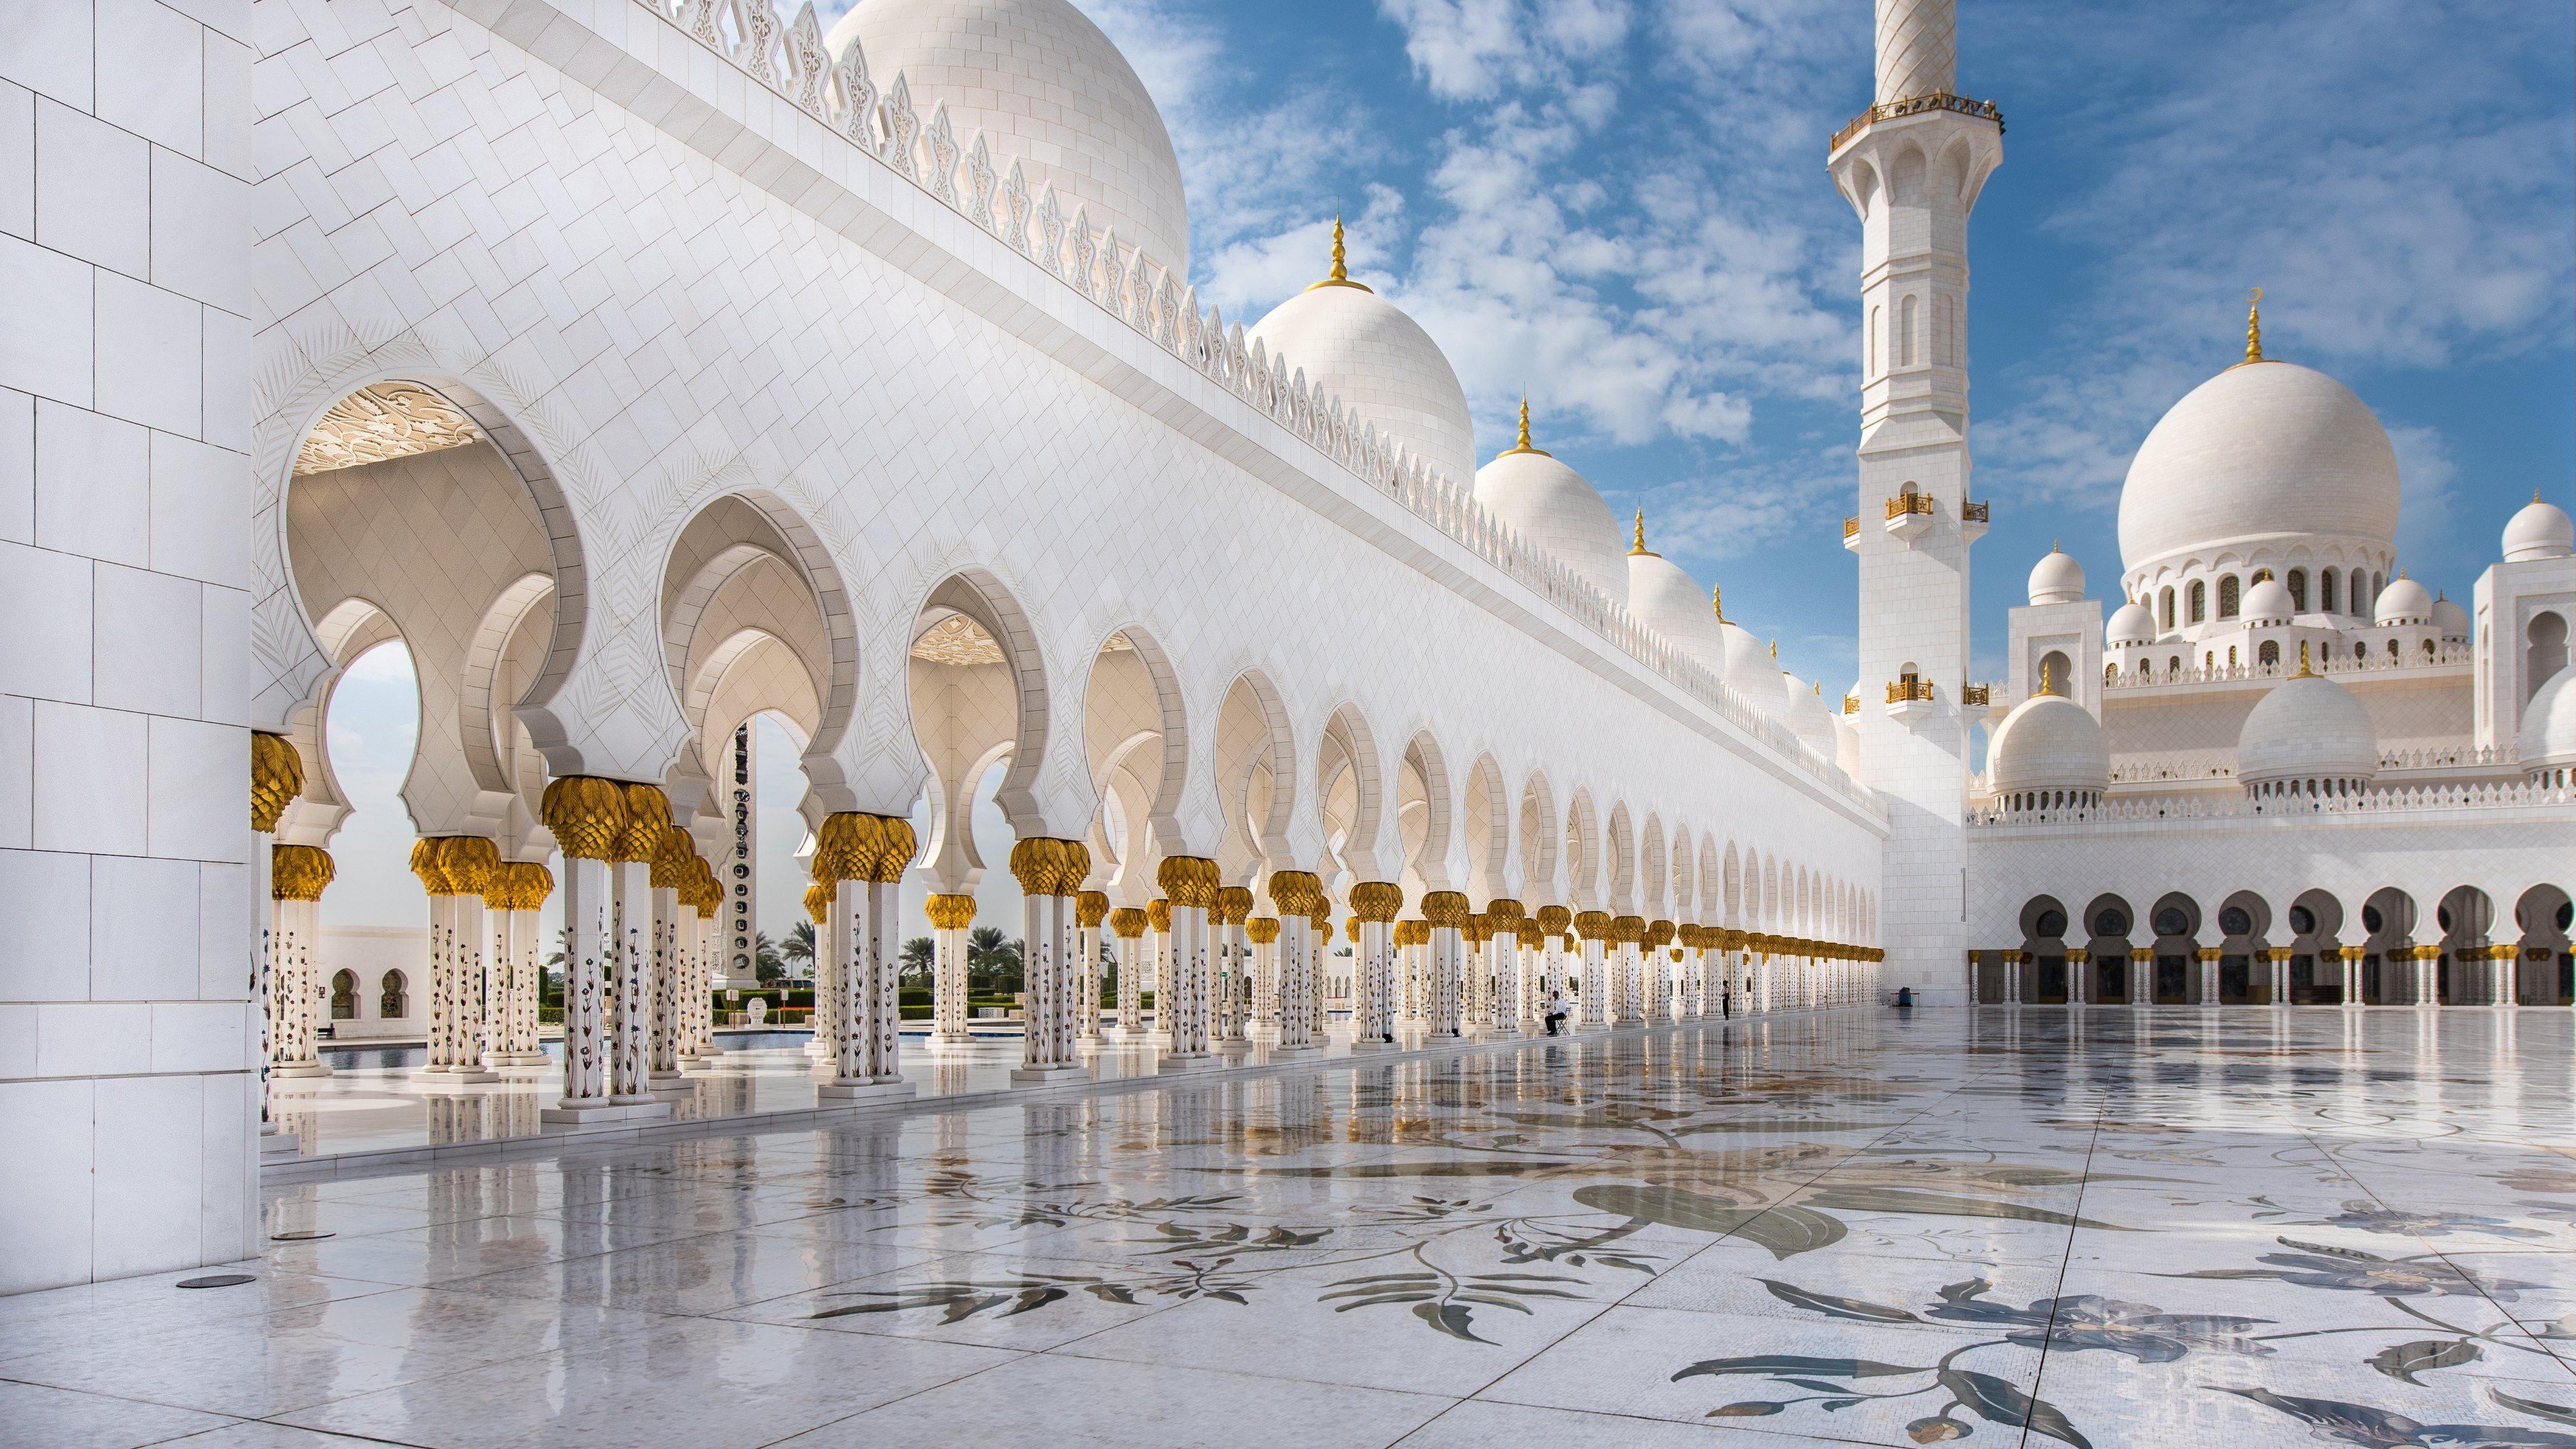 Abu Dhabi Mosque Wallpaper in HD, 4K and wide sizes